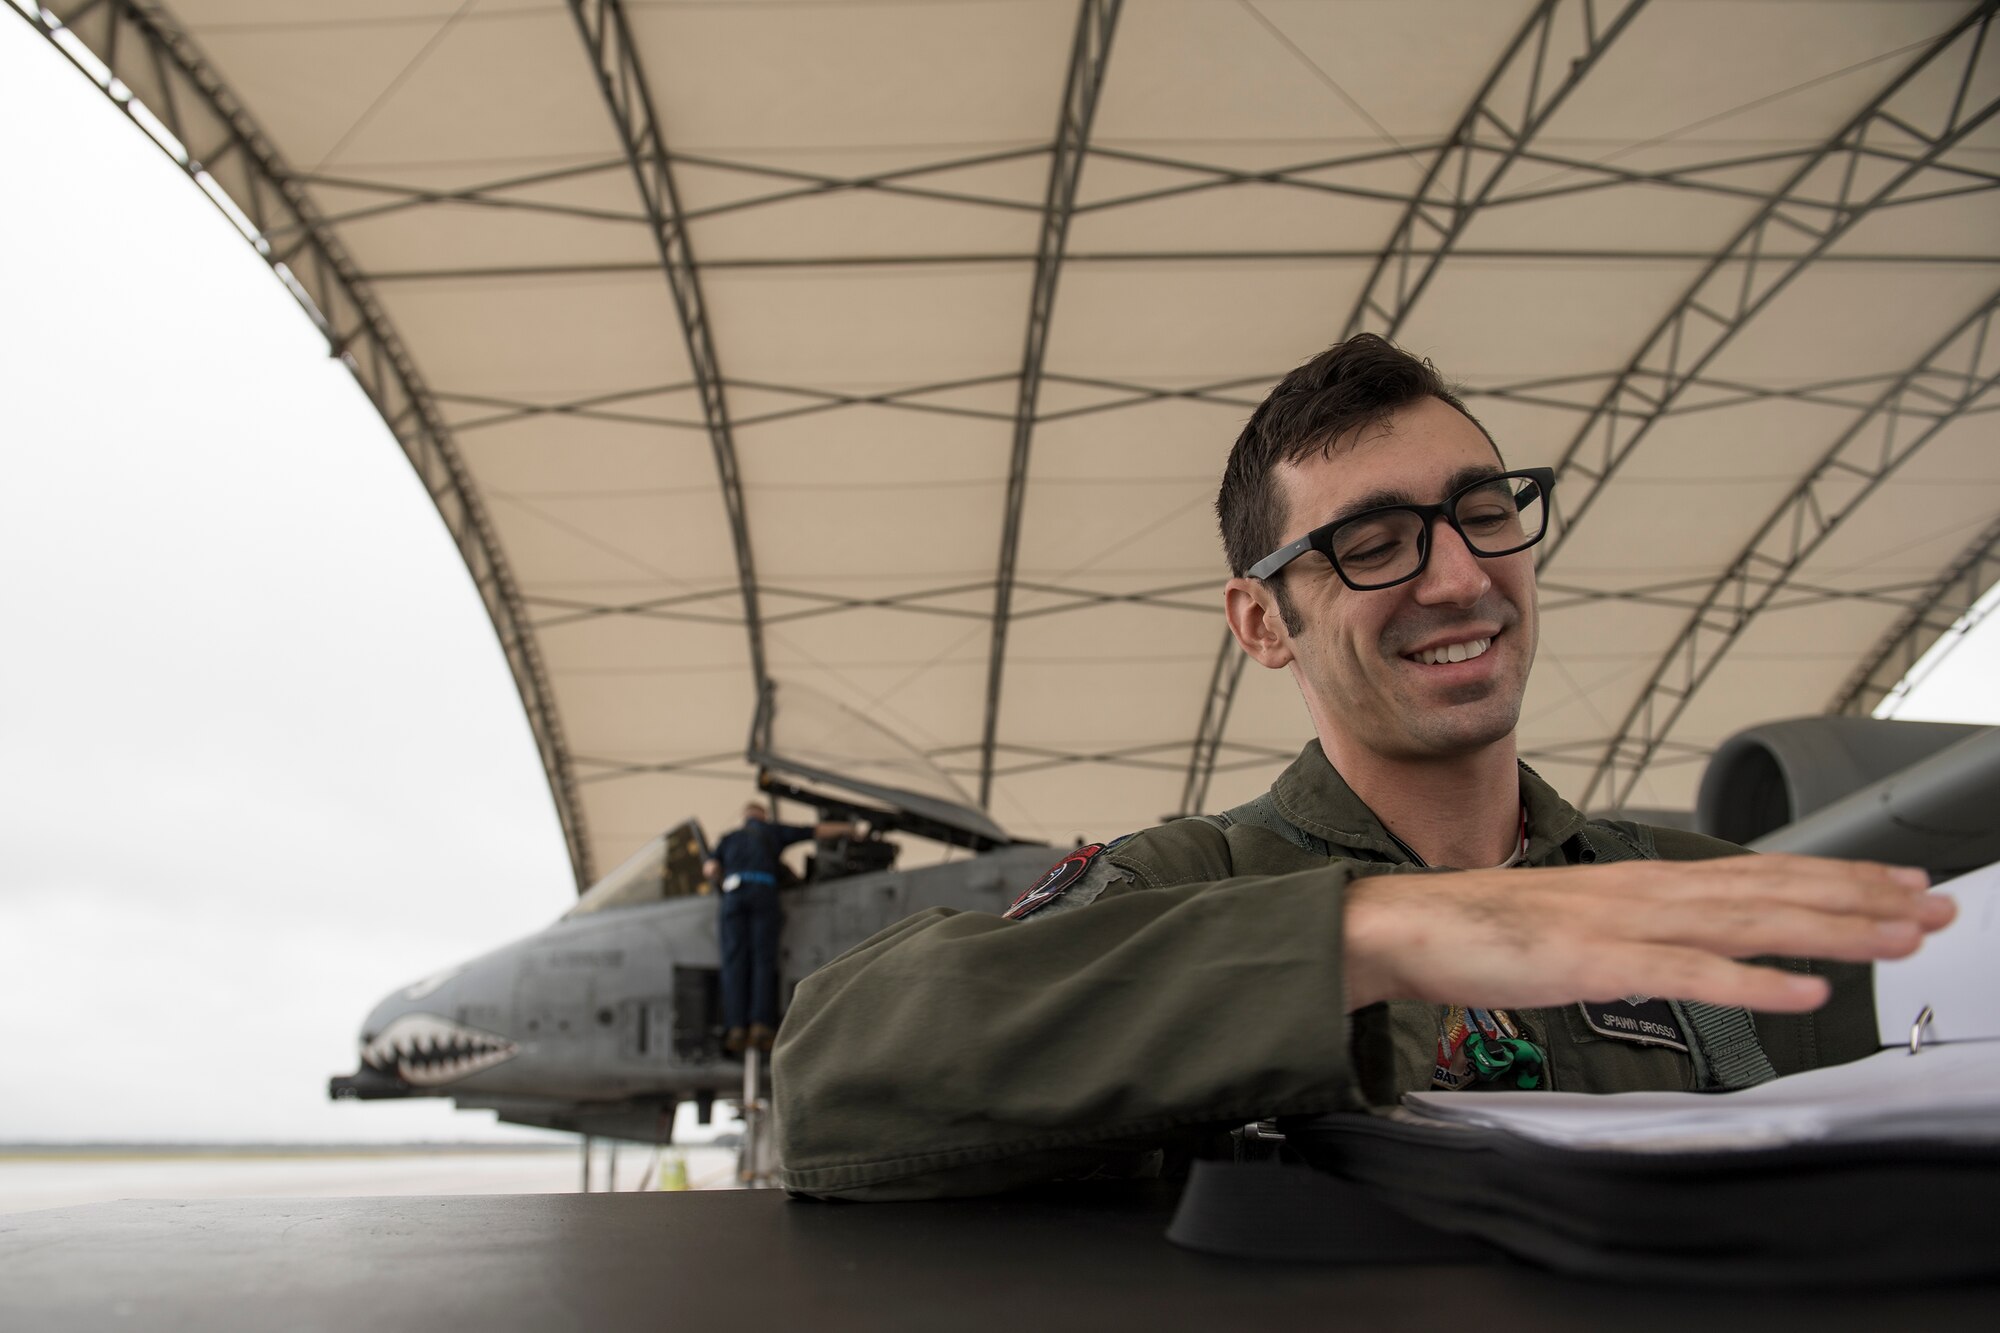 Capt. Maurice Grosso, 75th Fighter Squadron A-10C Thunderbolt II pilot, looks over paperwork prior to a sortie, Dec. 6, 2017, at Moody Air Force Base, Ga. Moody’s week-long, Phase 1, Phase 2 exercise is designed to demonstrate the 23d Wing’s ability to meet combatant commander objectives and tested the pilots’ and maintainers’ ability to launch around-the-clock sorties at an accelerated rate during a sortie surge. (U.S. Air Force photo by Staff Sgt. Ryan Callaghan)